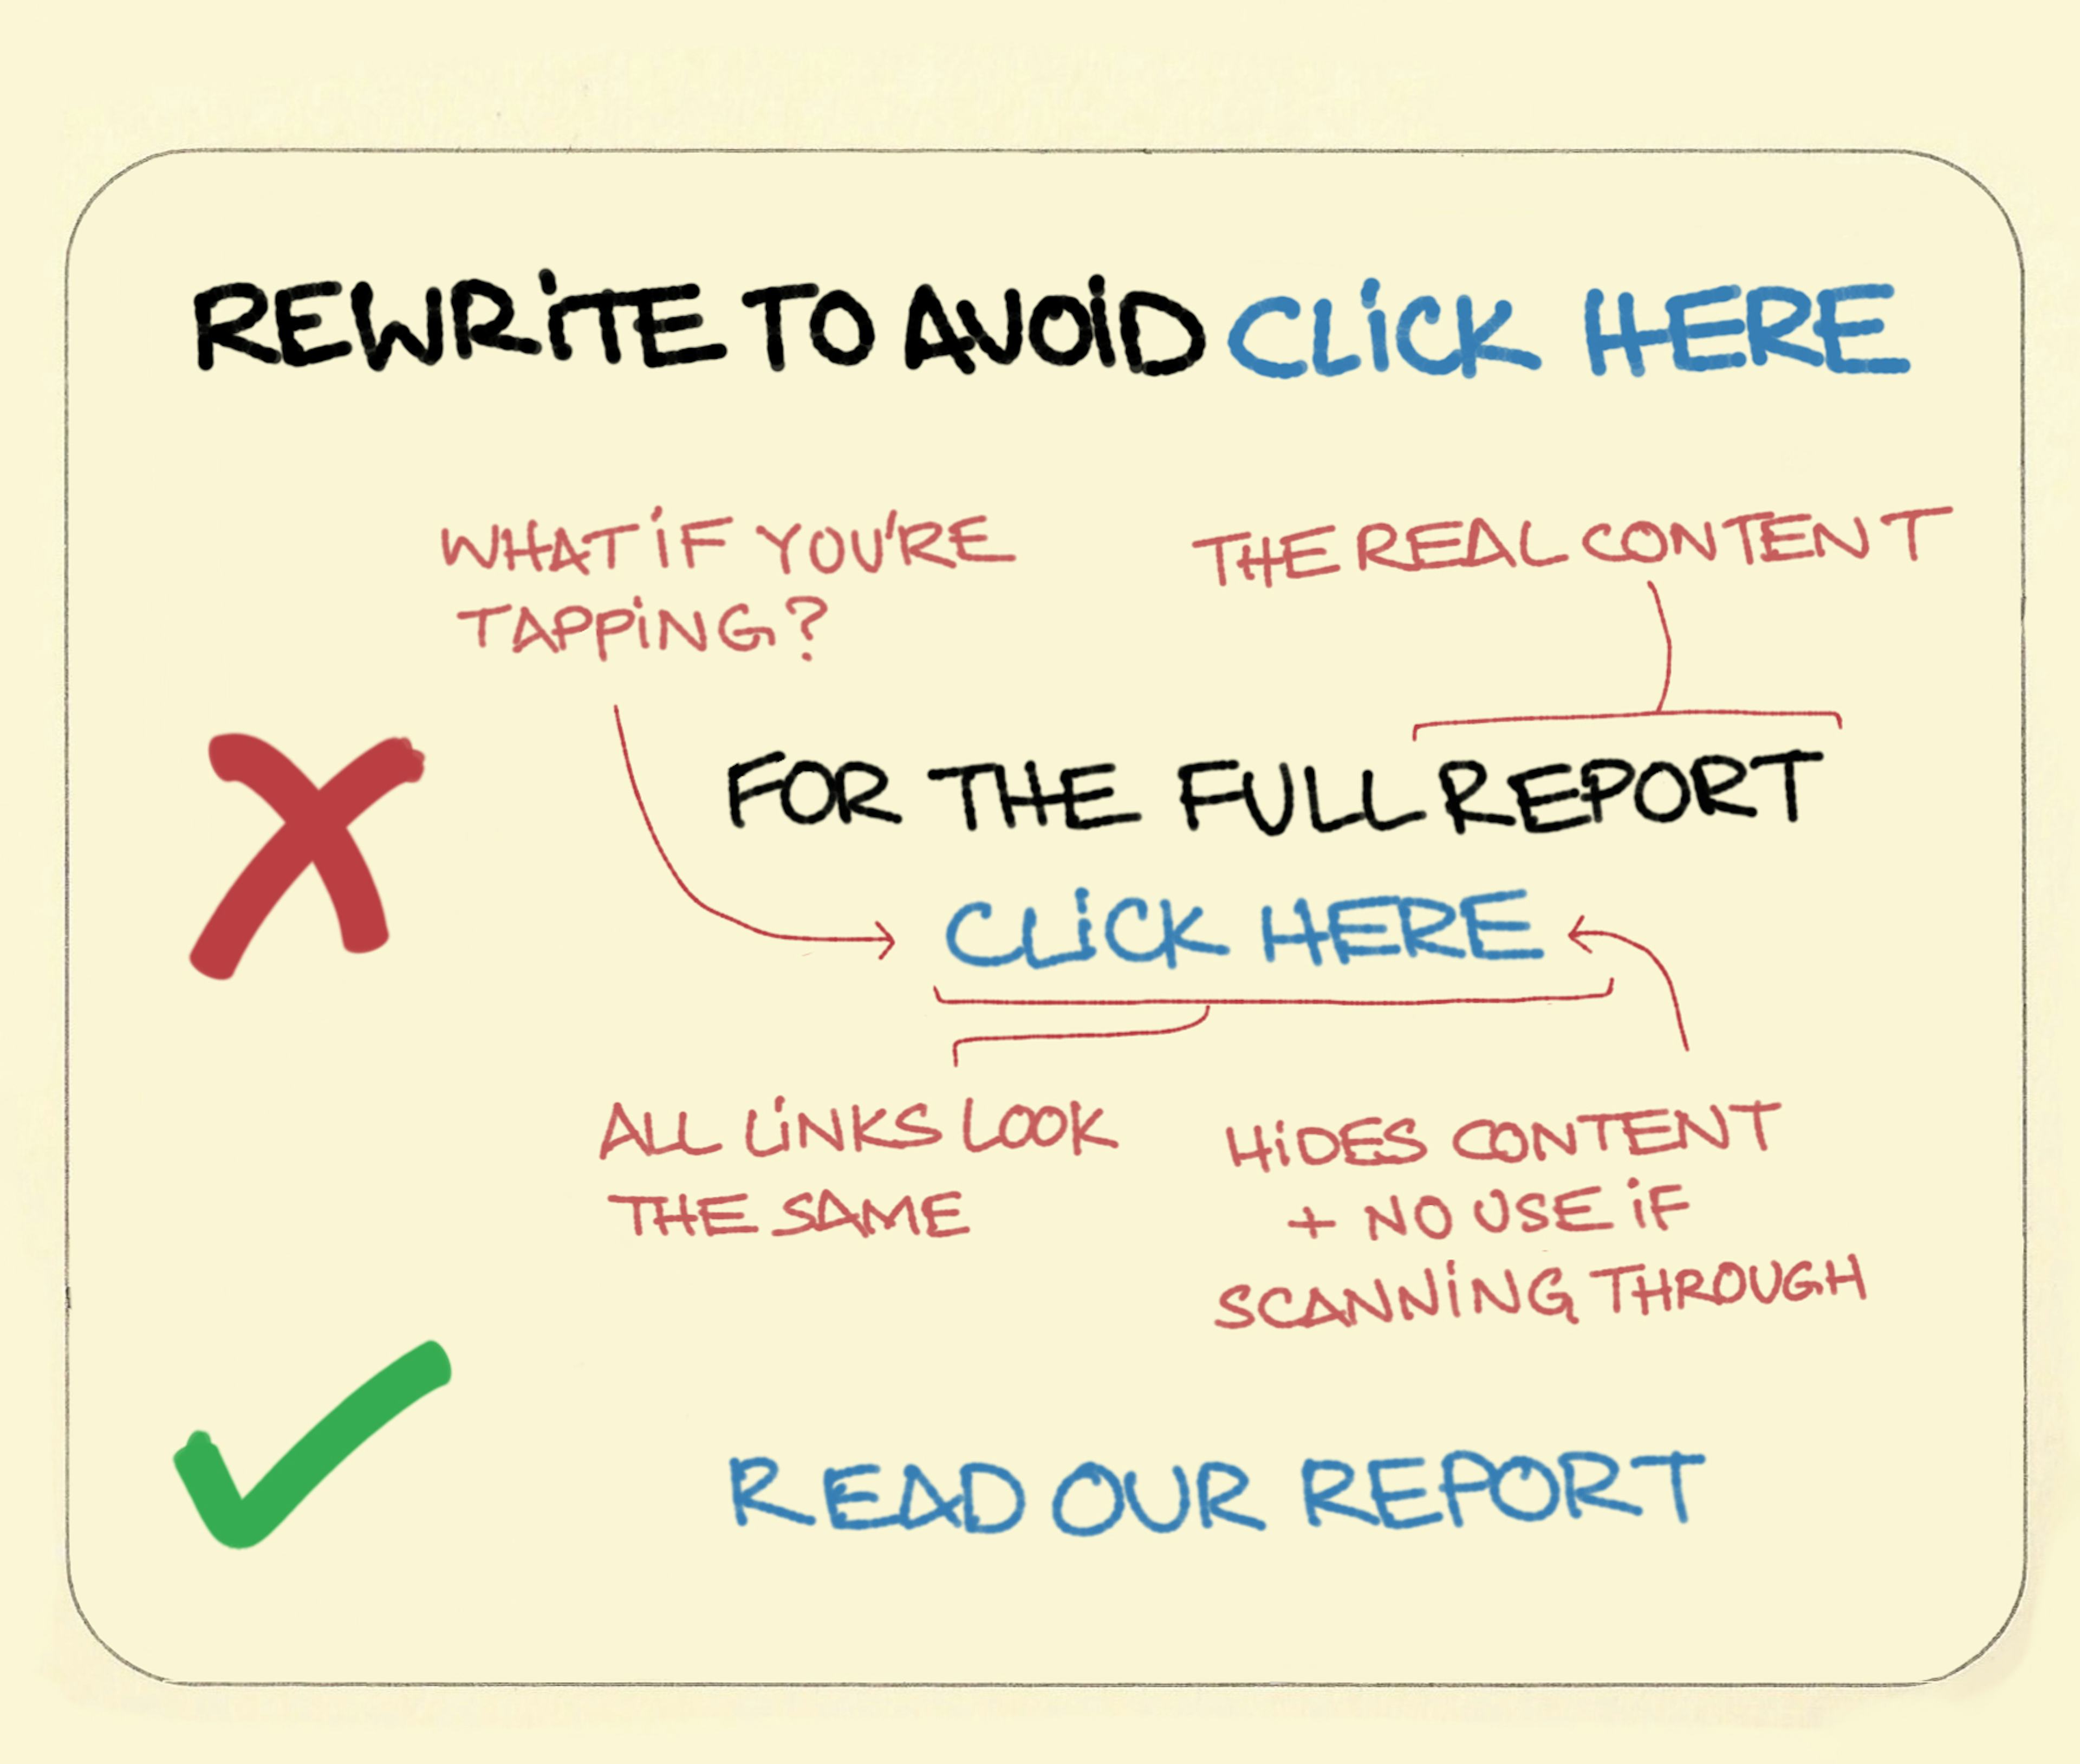 Rewrite to avoid click here - Sketchplanations